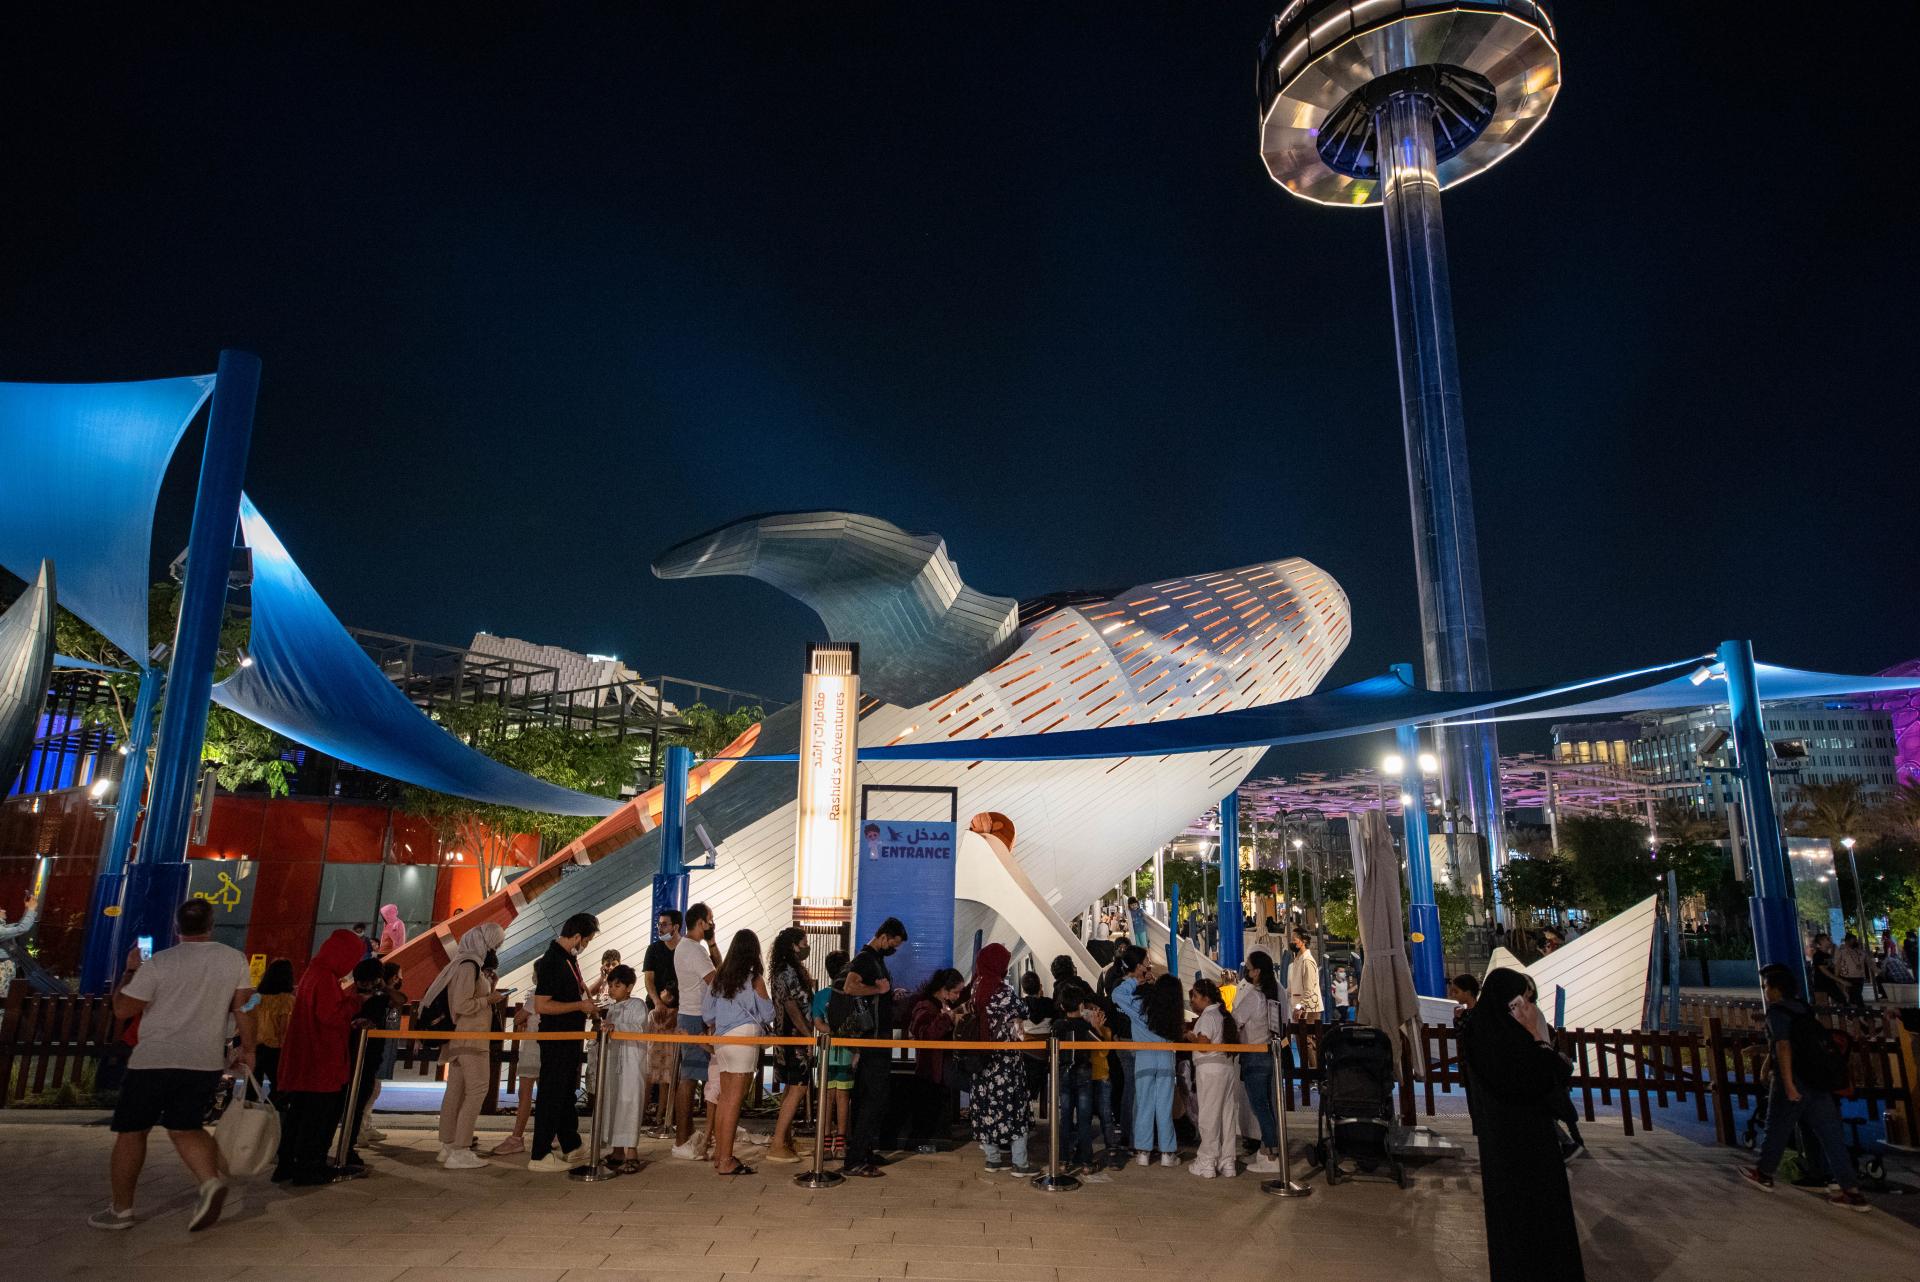 People in queue to whale playground at Expo 2020, MONSTRUM playgrounds